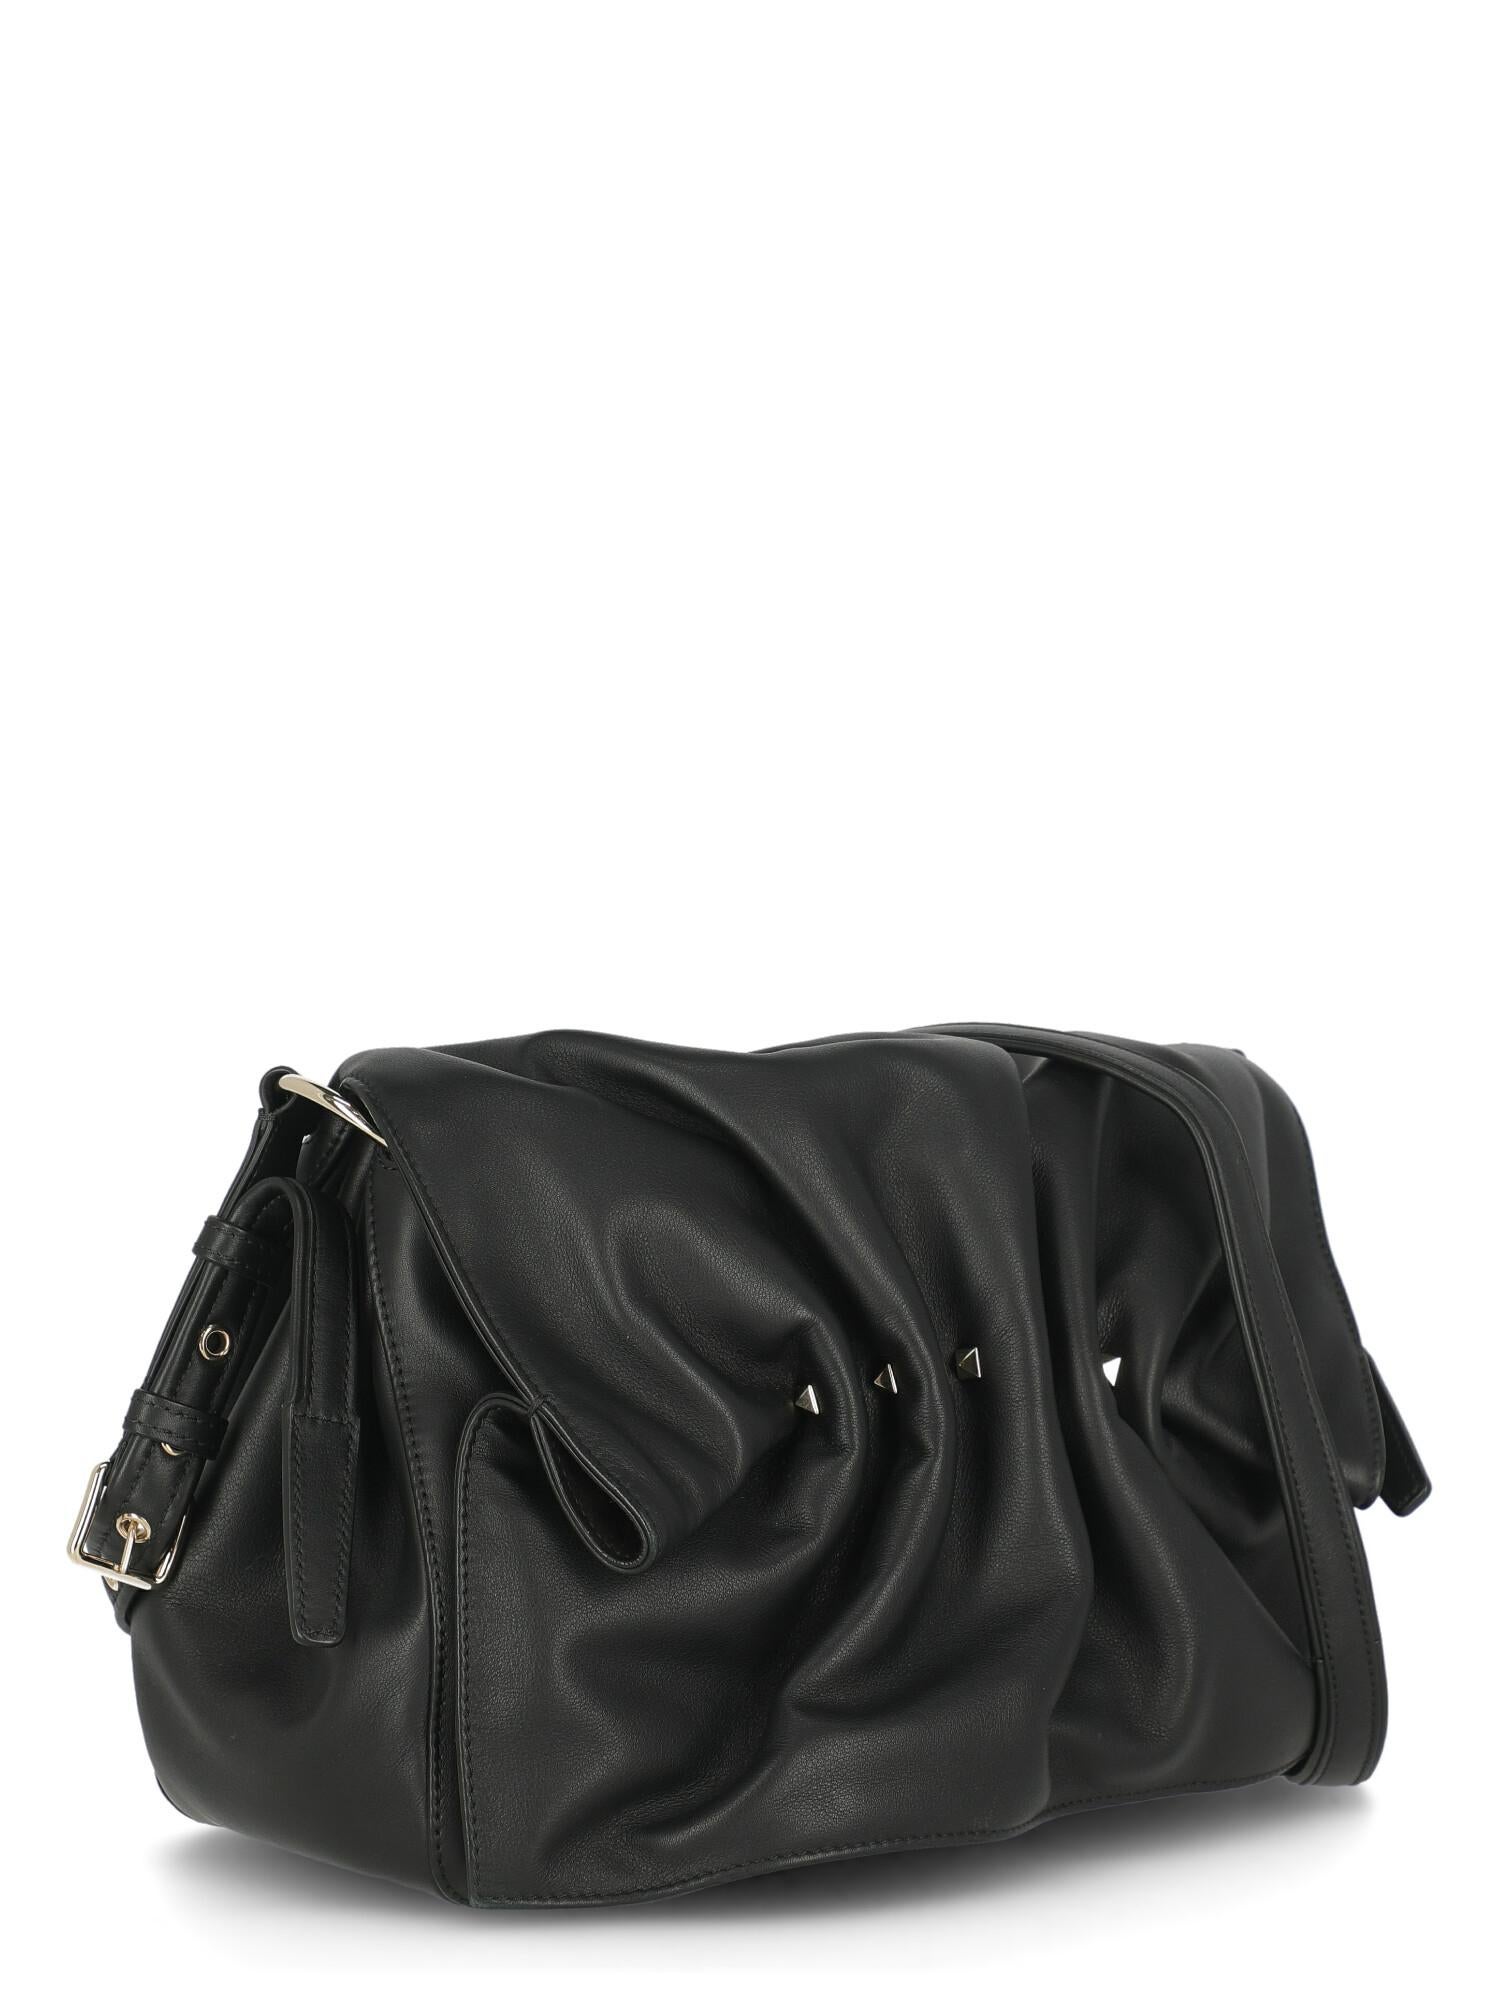 Valentino Woman Shoulder bag  Black Leather In Good Condition For Sale In Milan, IT